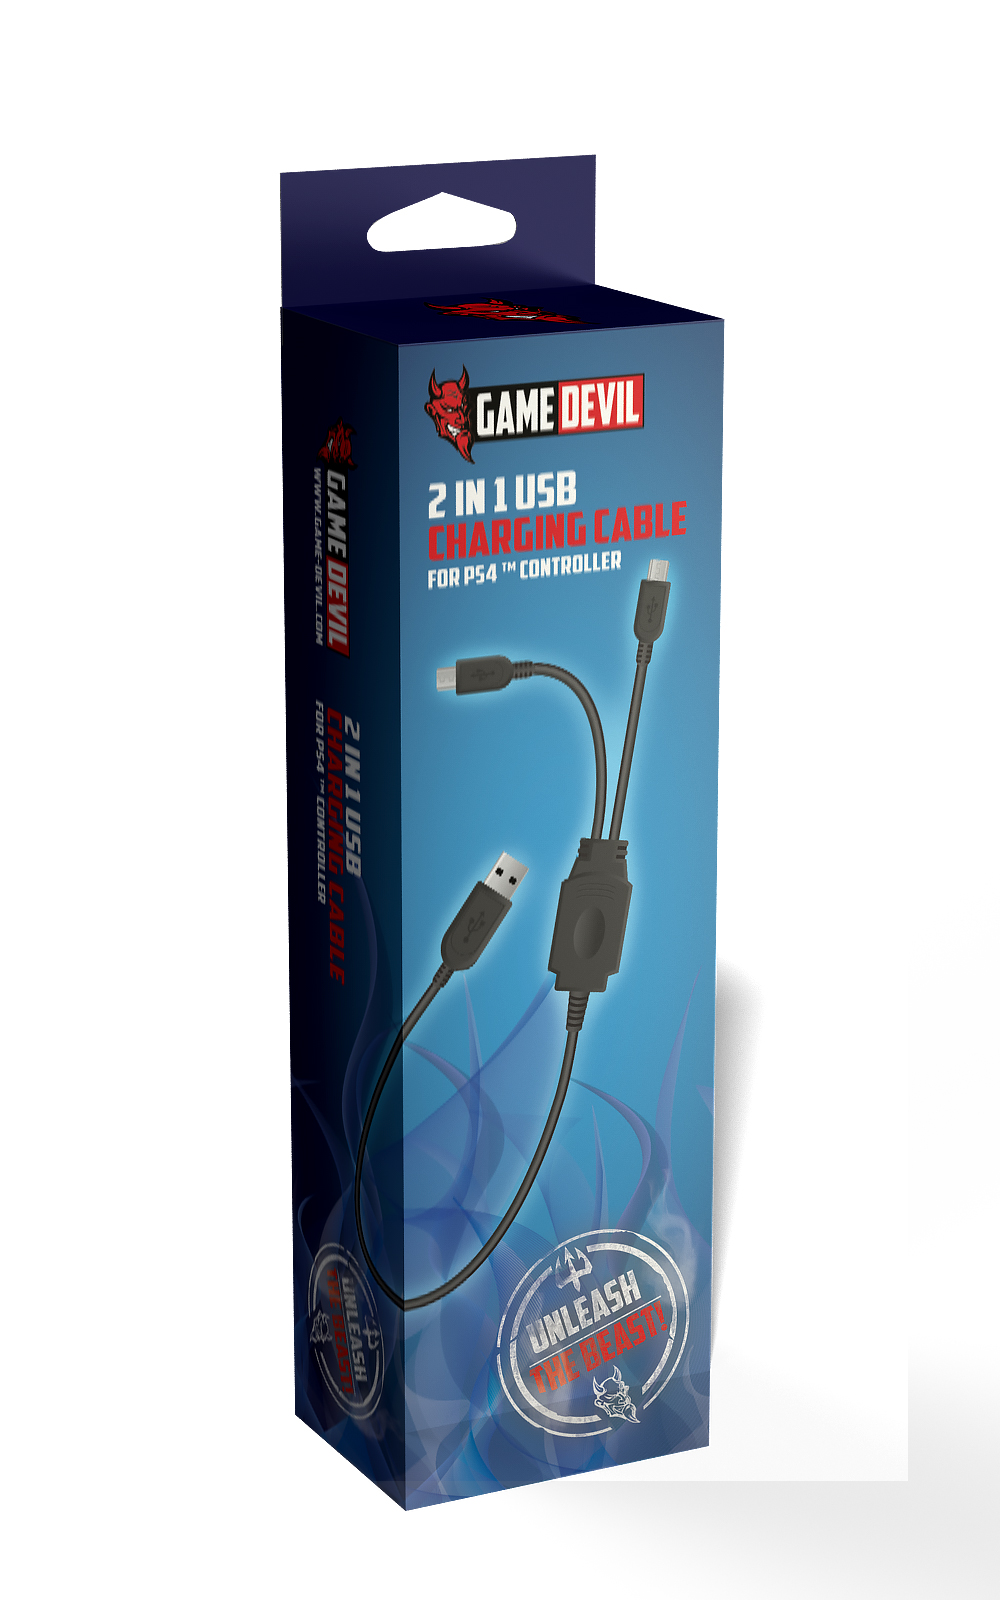 GameDevil PS4 Charging Cable 2in1